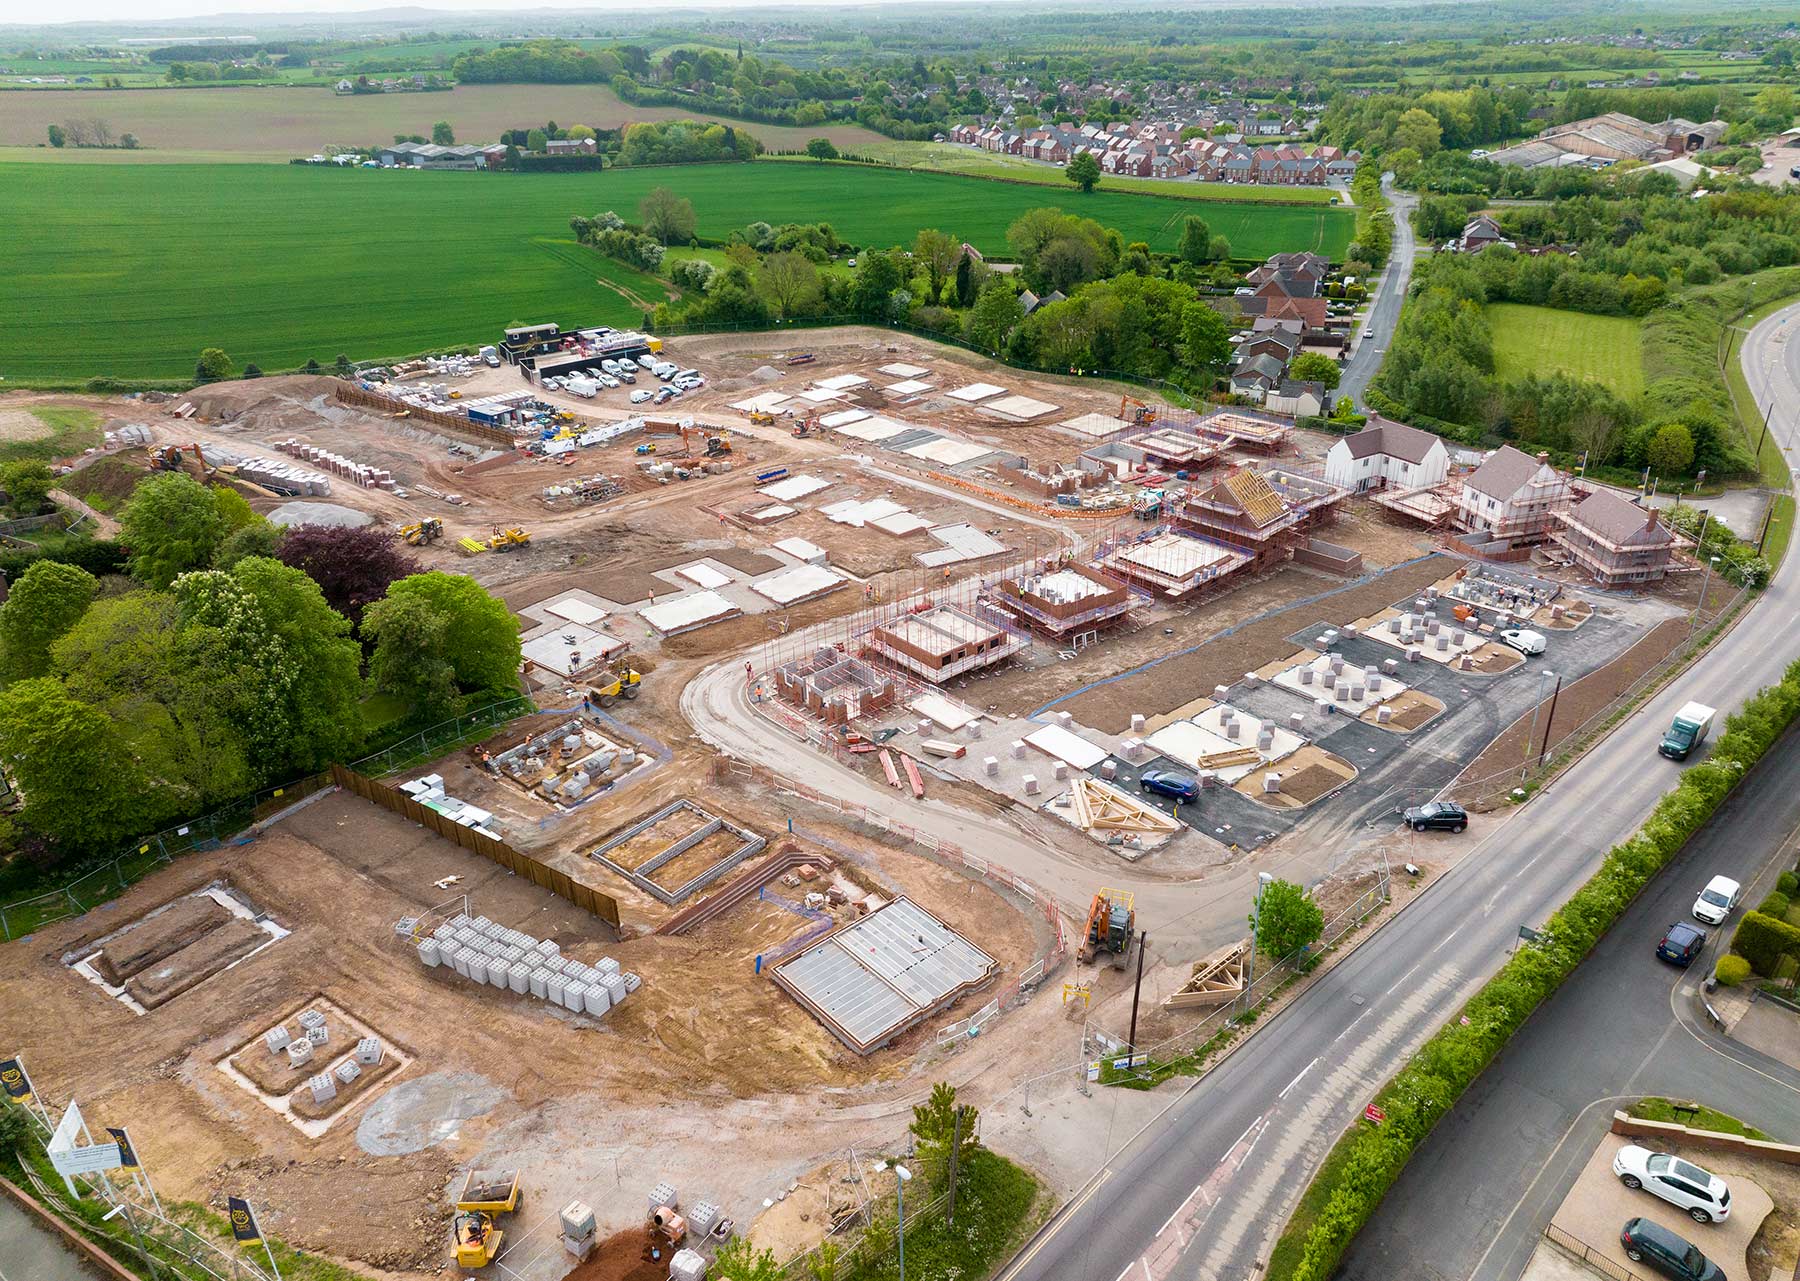 Aerailk view of a construction site  showing the round working of a housing development